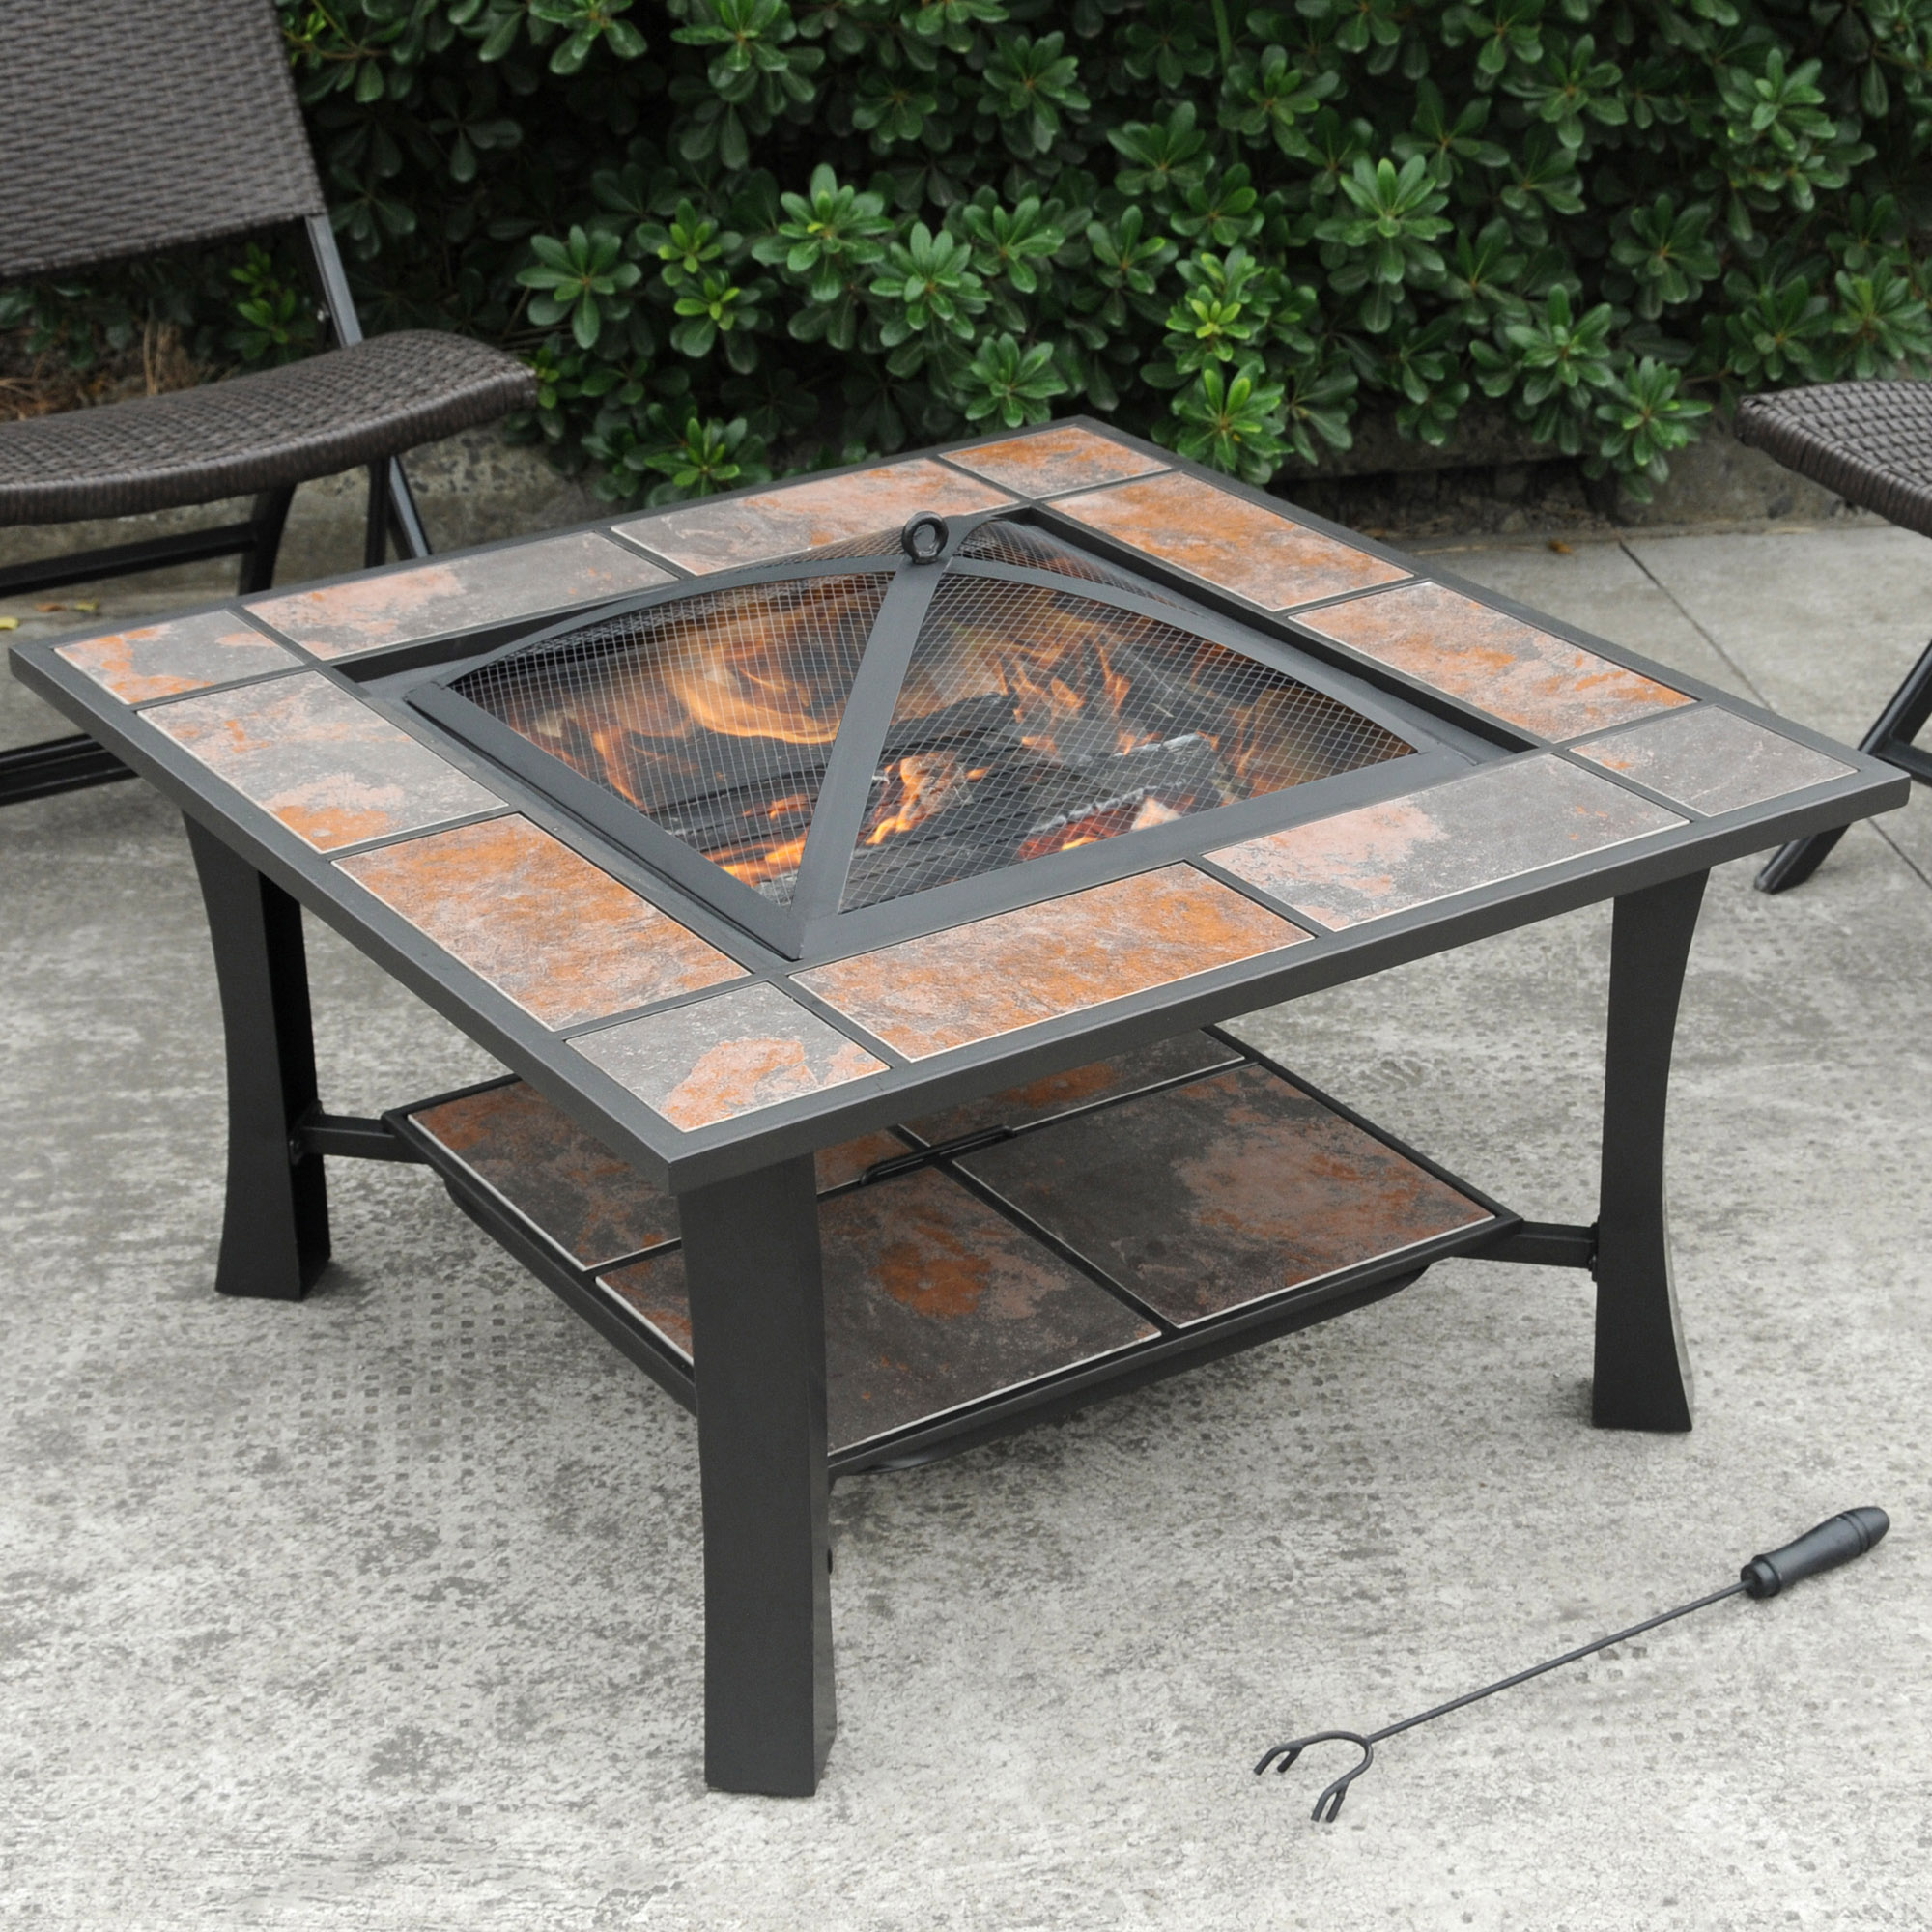 Axxonn 32", 2-in-1 Malaga Convertible Square Tile Top Fire Pit, Coffee Table wood burning Fire Bowl - image 2 of 5